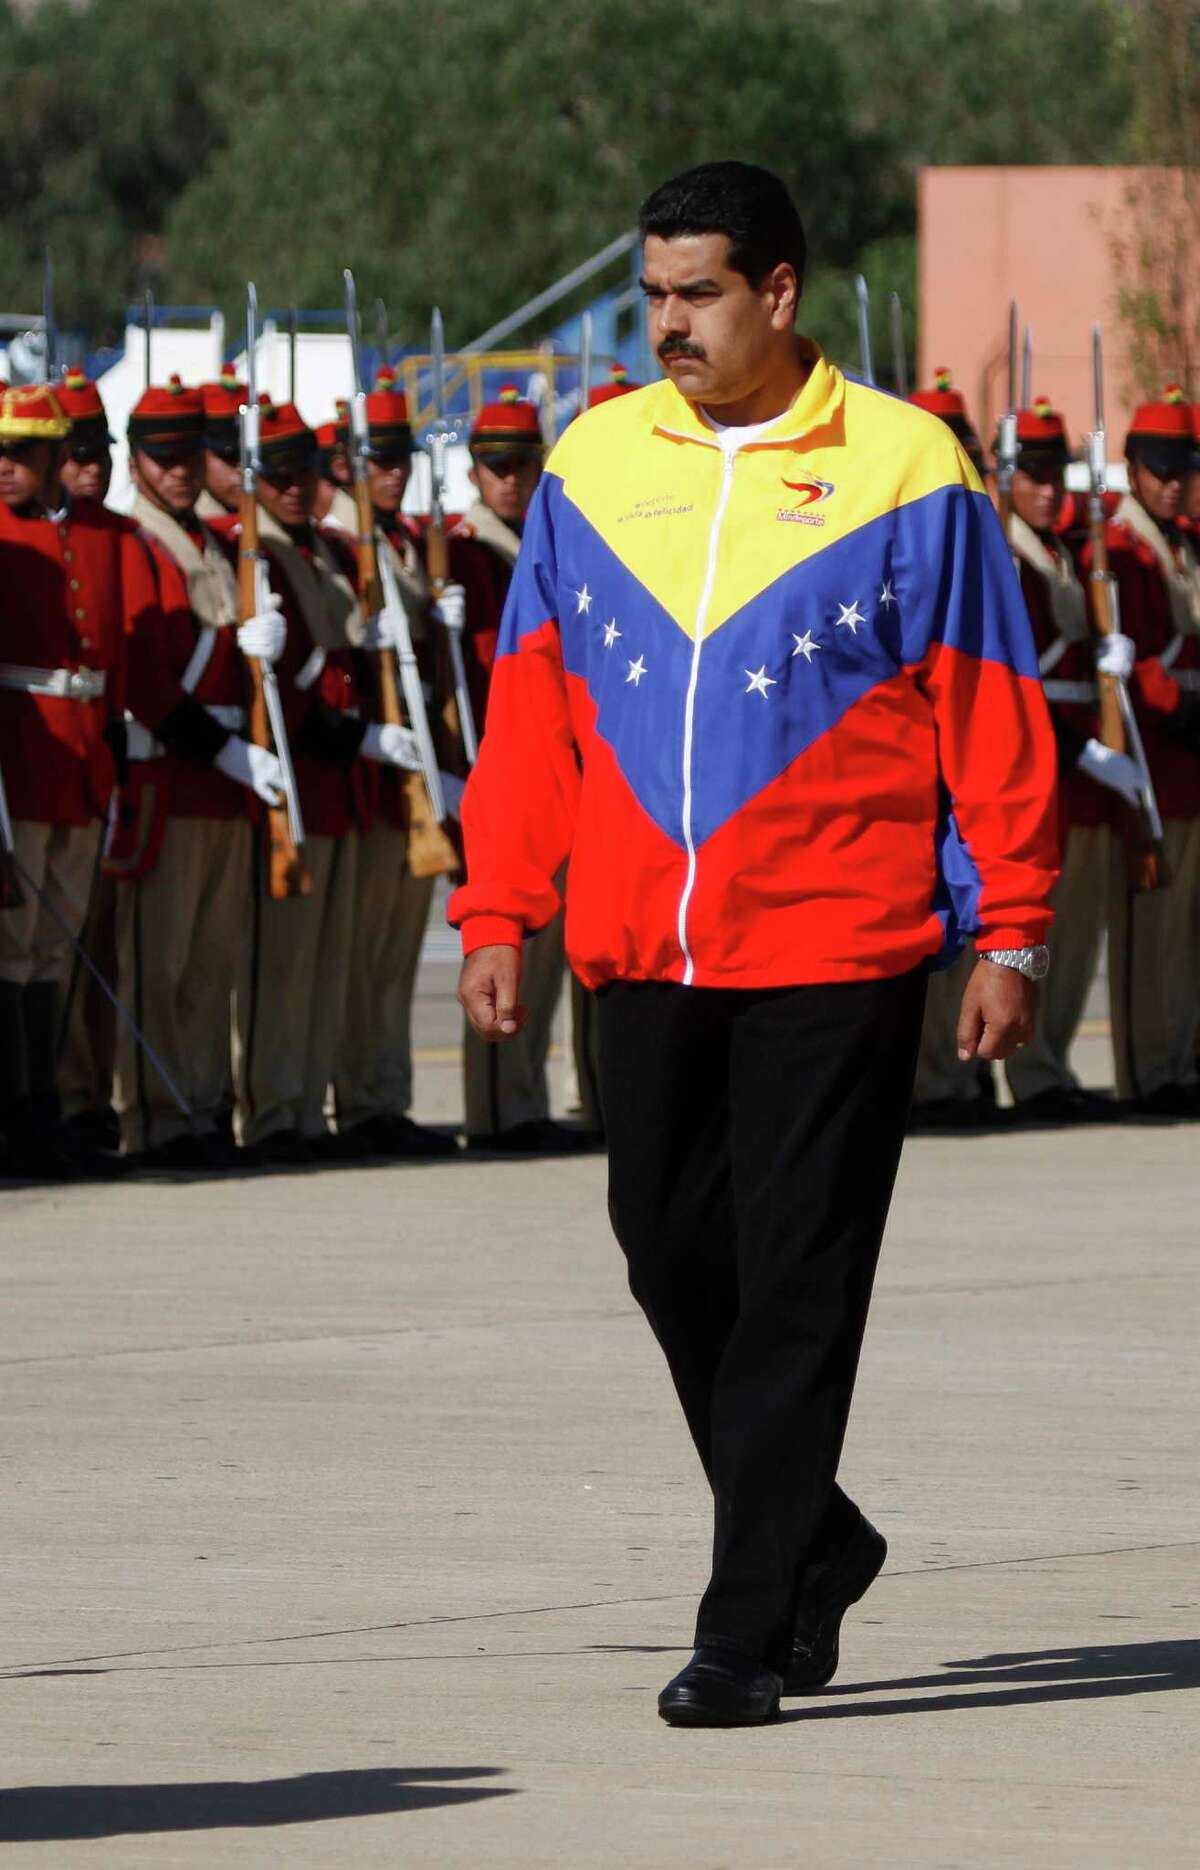 Venezuela's President Nicolas Maduro reviews a honor guard upon his arrival to the airport in Cochabamba, Bolivia, Thursday, July 4, 2013. Maduro is in Cochabamba for an extraordinary meeting of South American leaders to show support for Bolivian President Evo Morales, whose plane was rerouted in Europe, over suspicions that National Security Agency leaker Edward Snowden was on board. (AP Photo/Juan Karita)